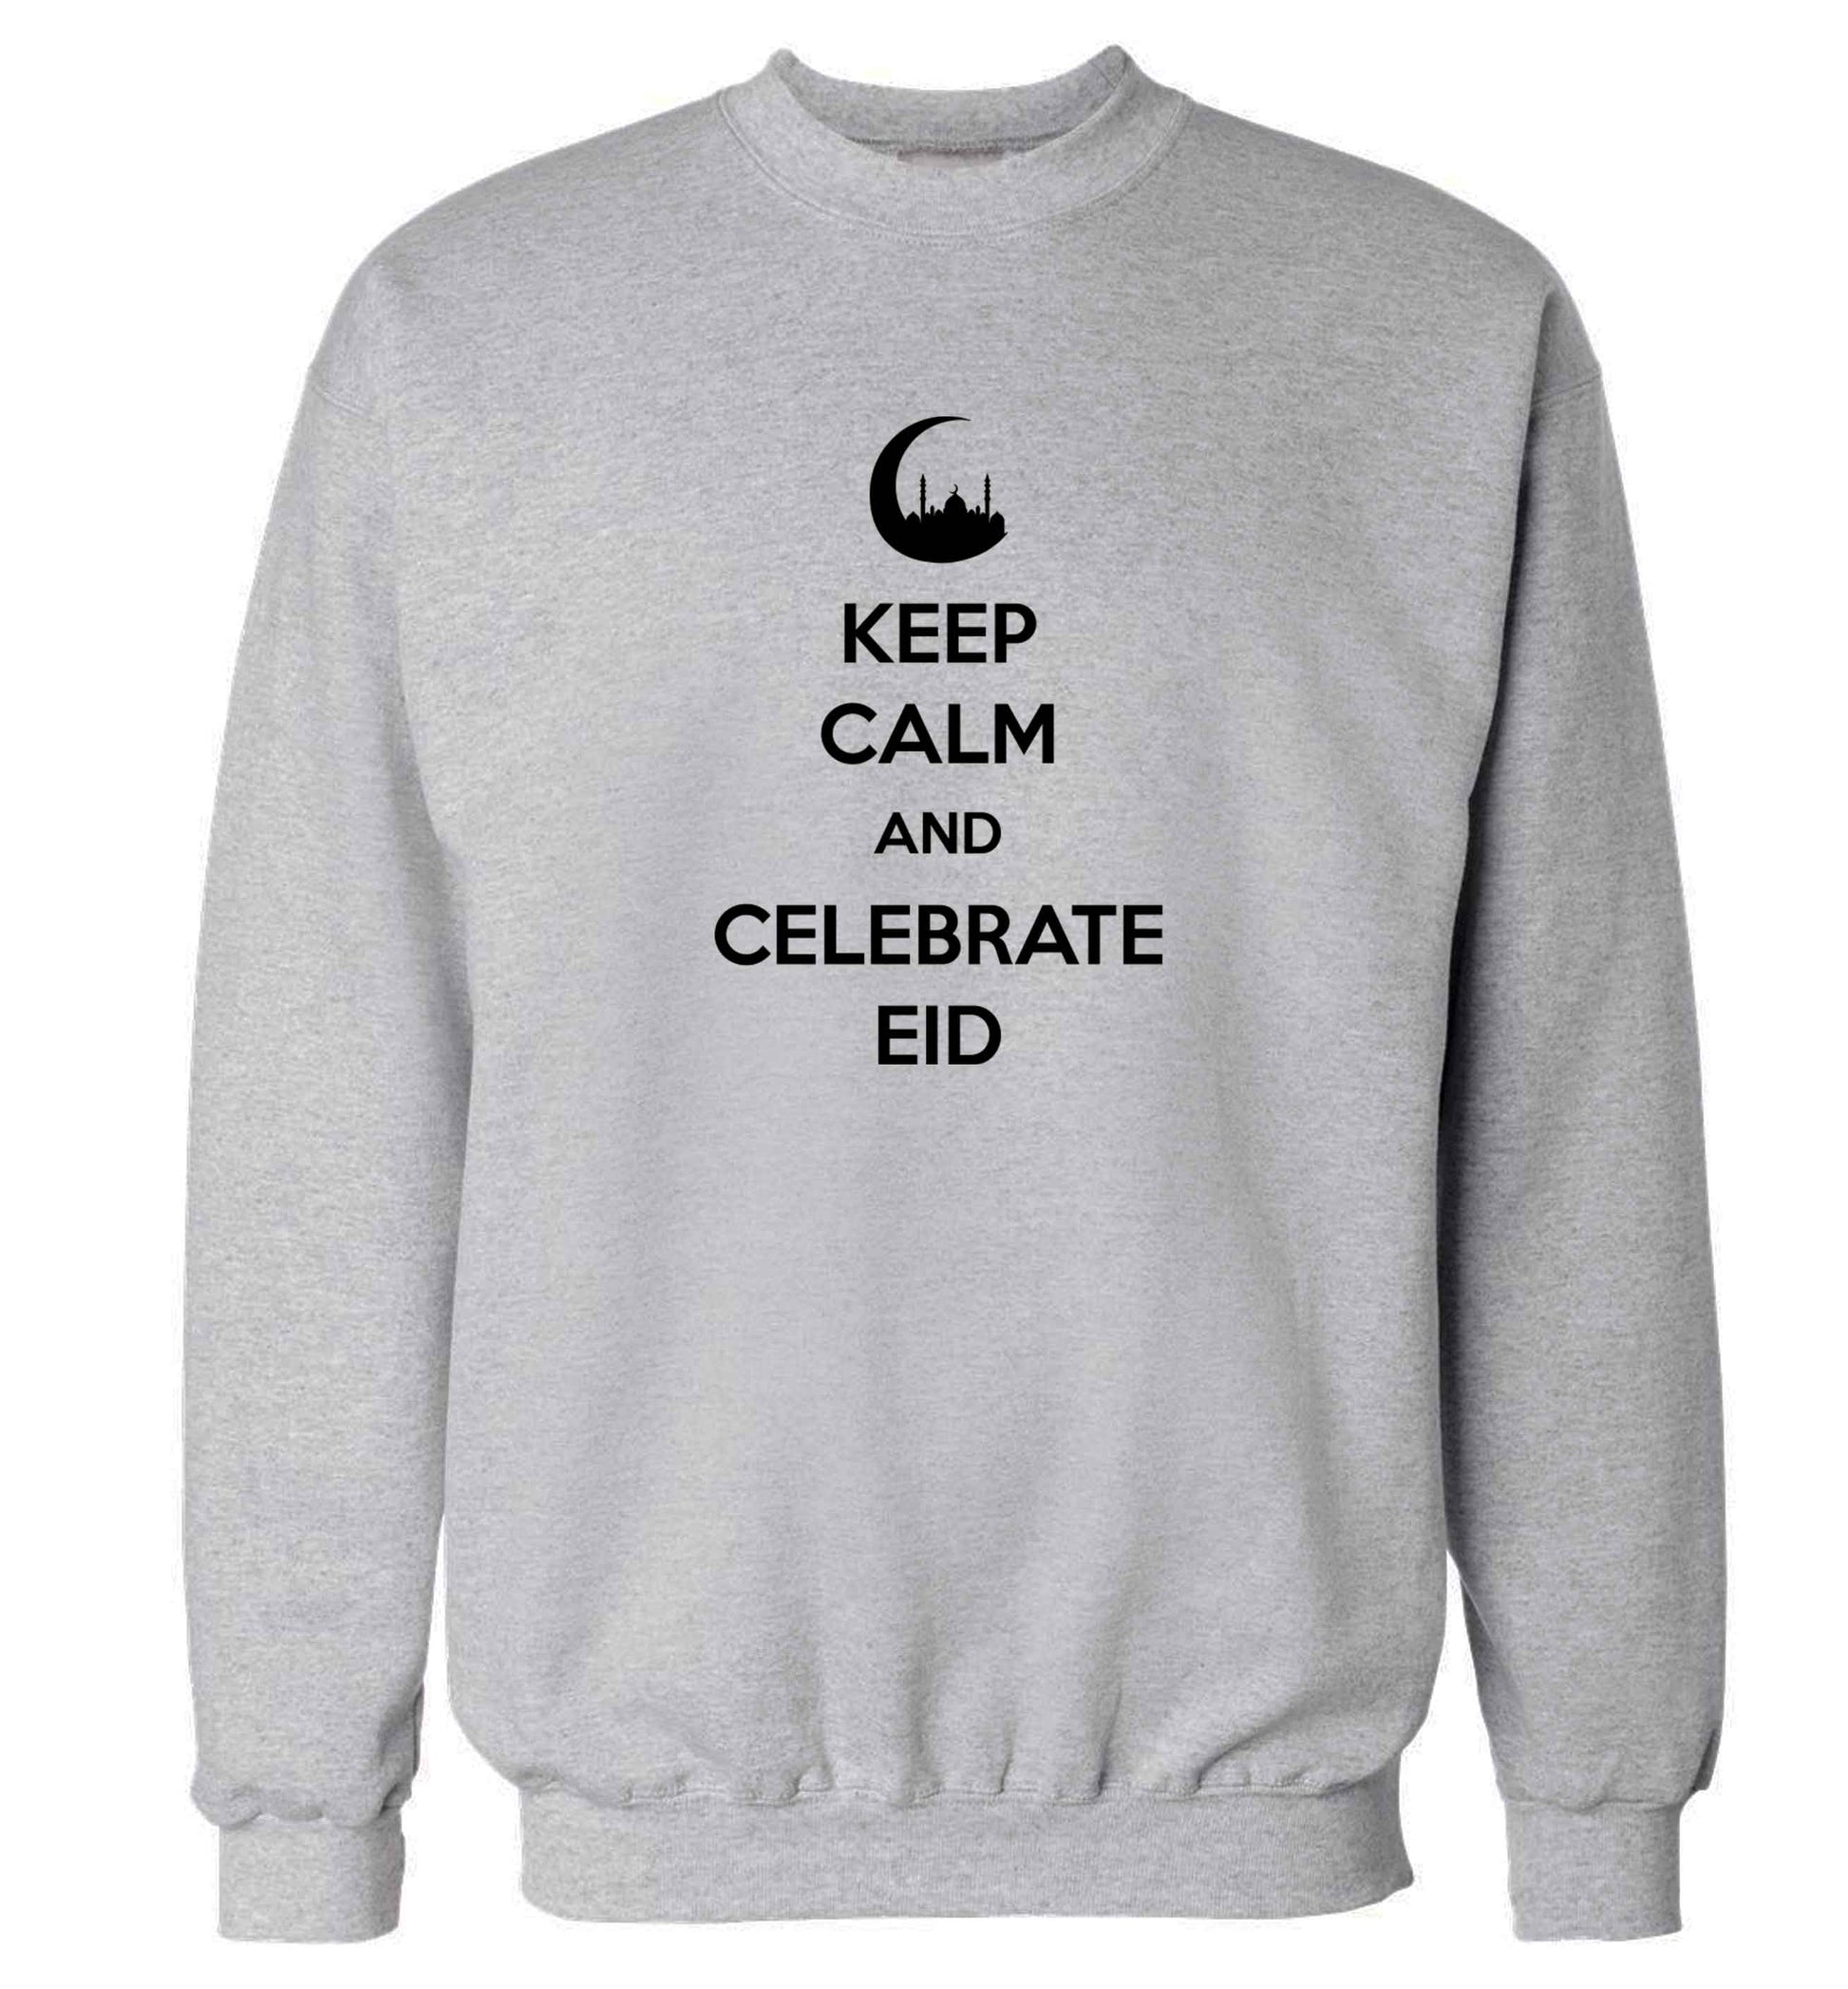 Keep calm and celebrate Eid adult's unisex grey sweater 2XL